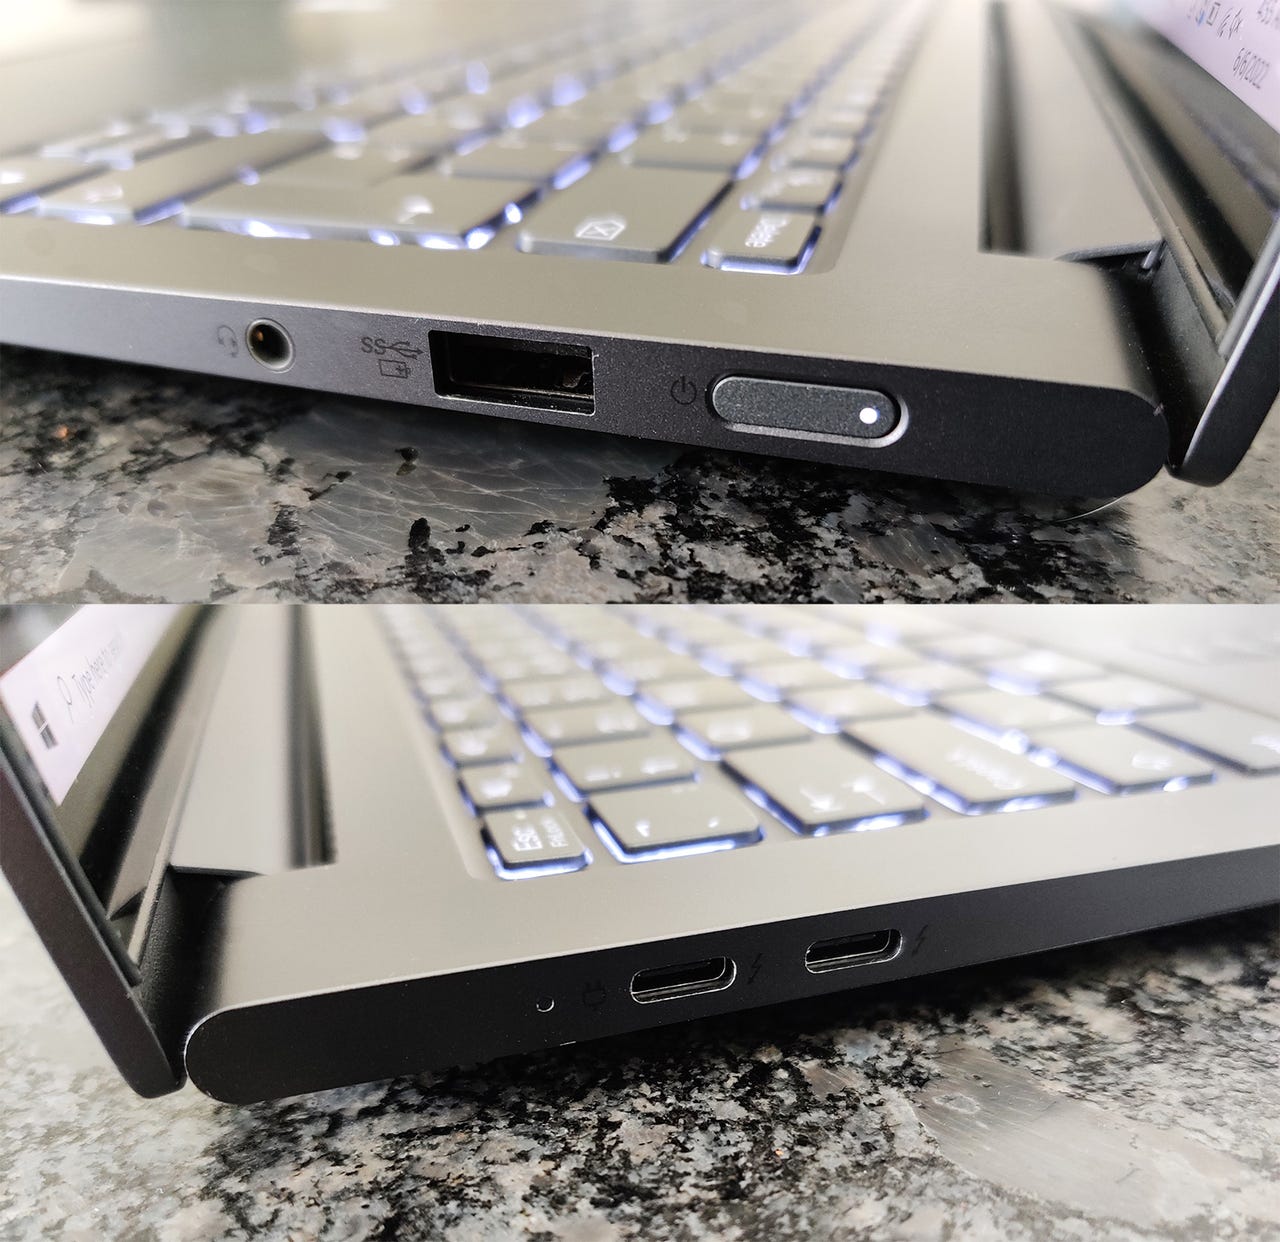 Lenovo Yoga Slim 7 Review: Charming Laptop with the Power of